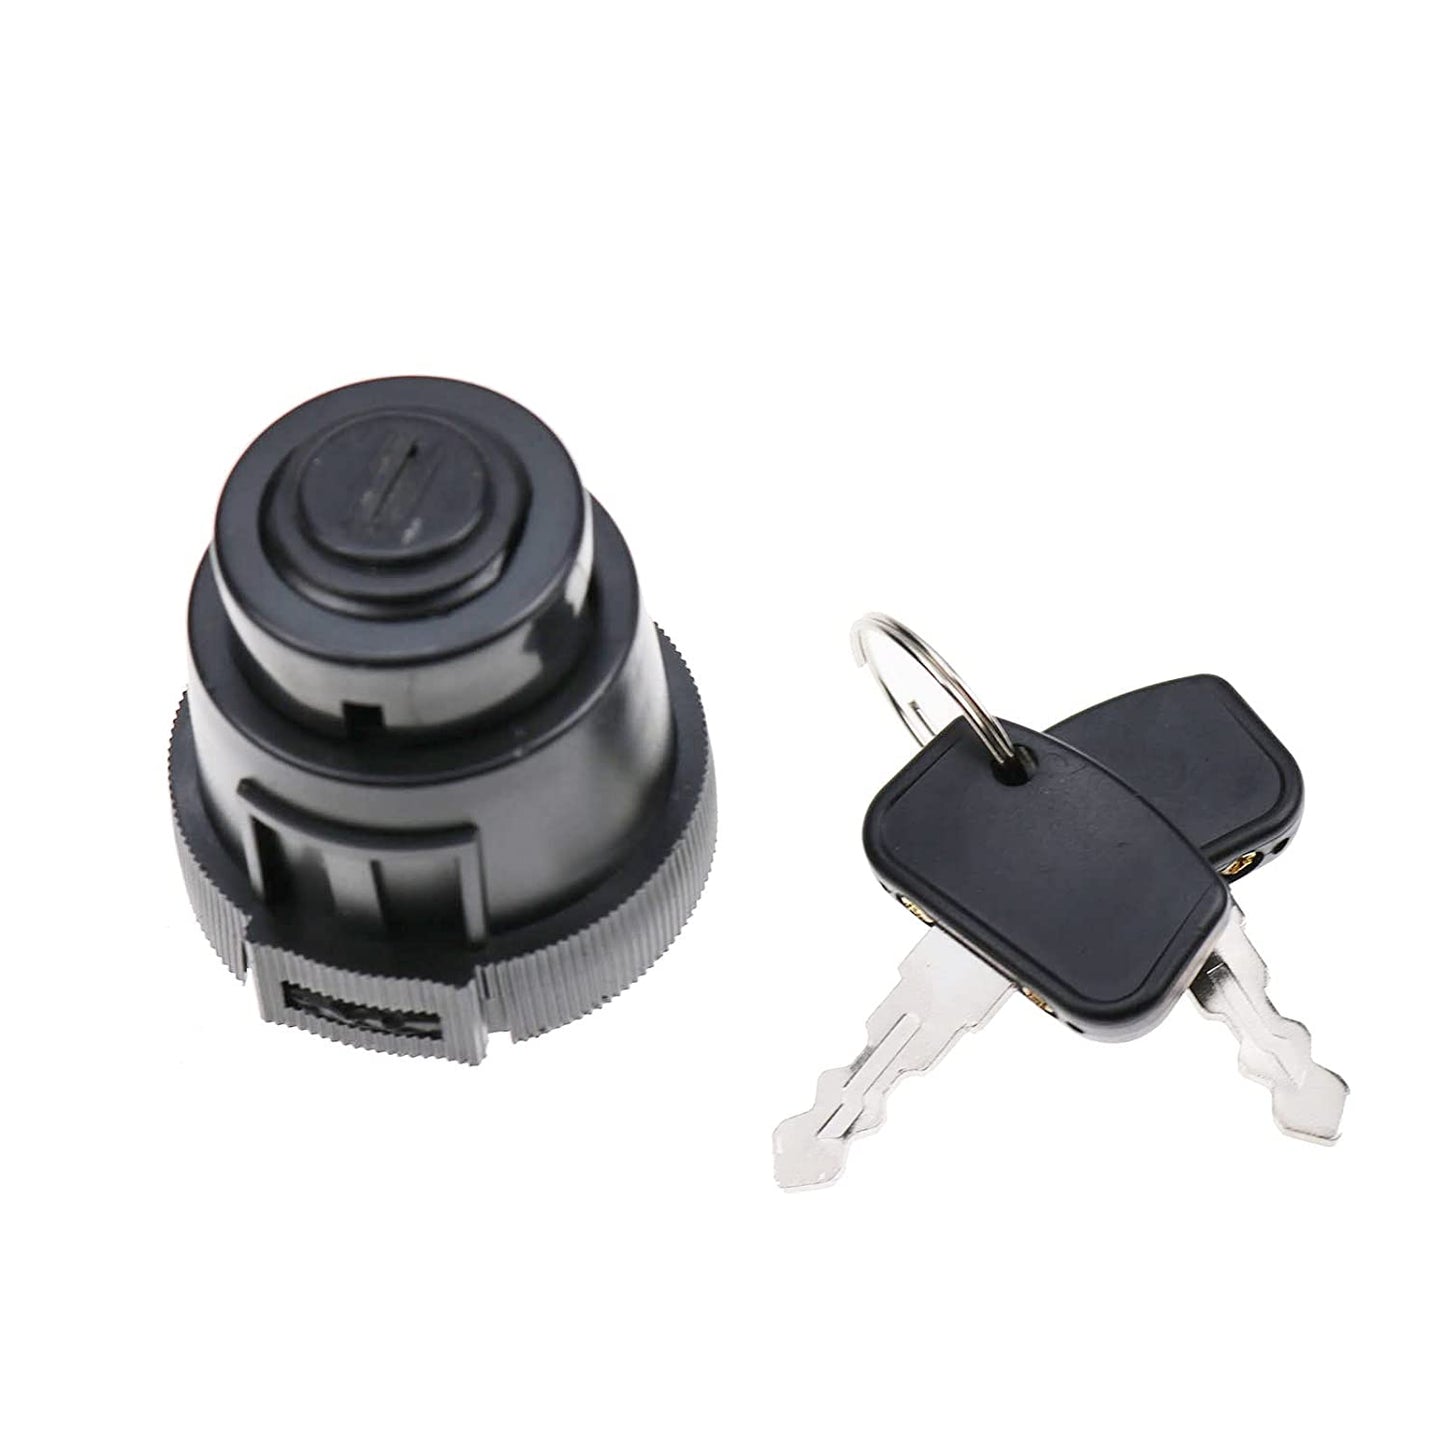 K7571-62102 Ignition Switch Compatible With Kubota BX1860 BX1870 BX1870-1 BX25DLB BX2670